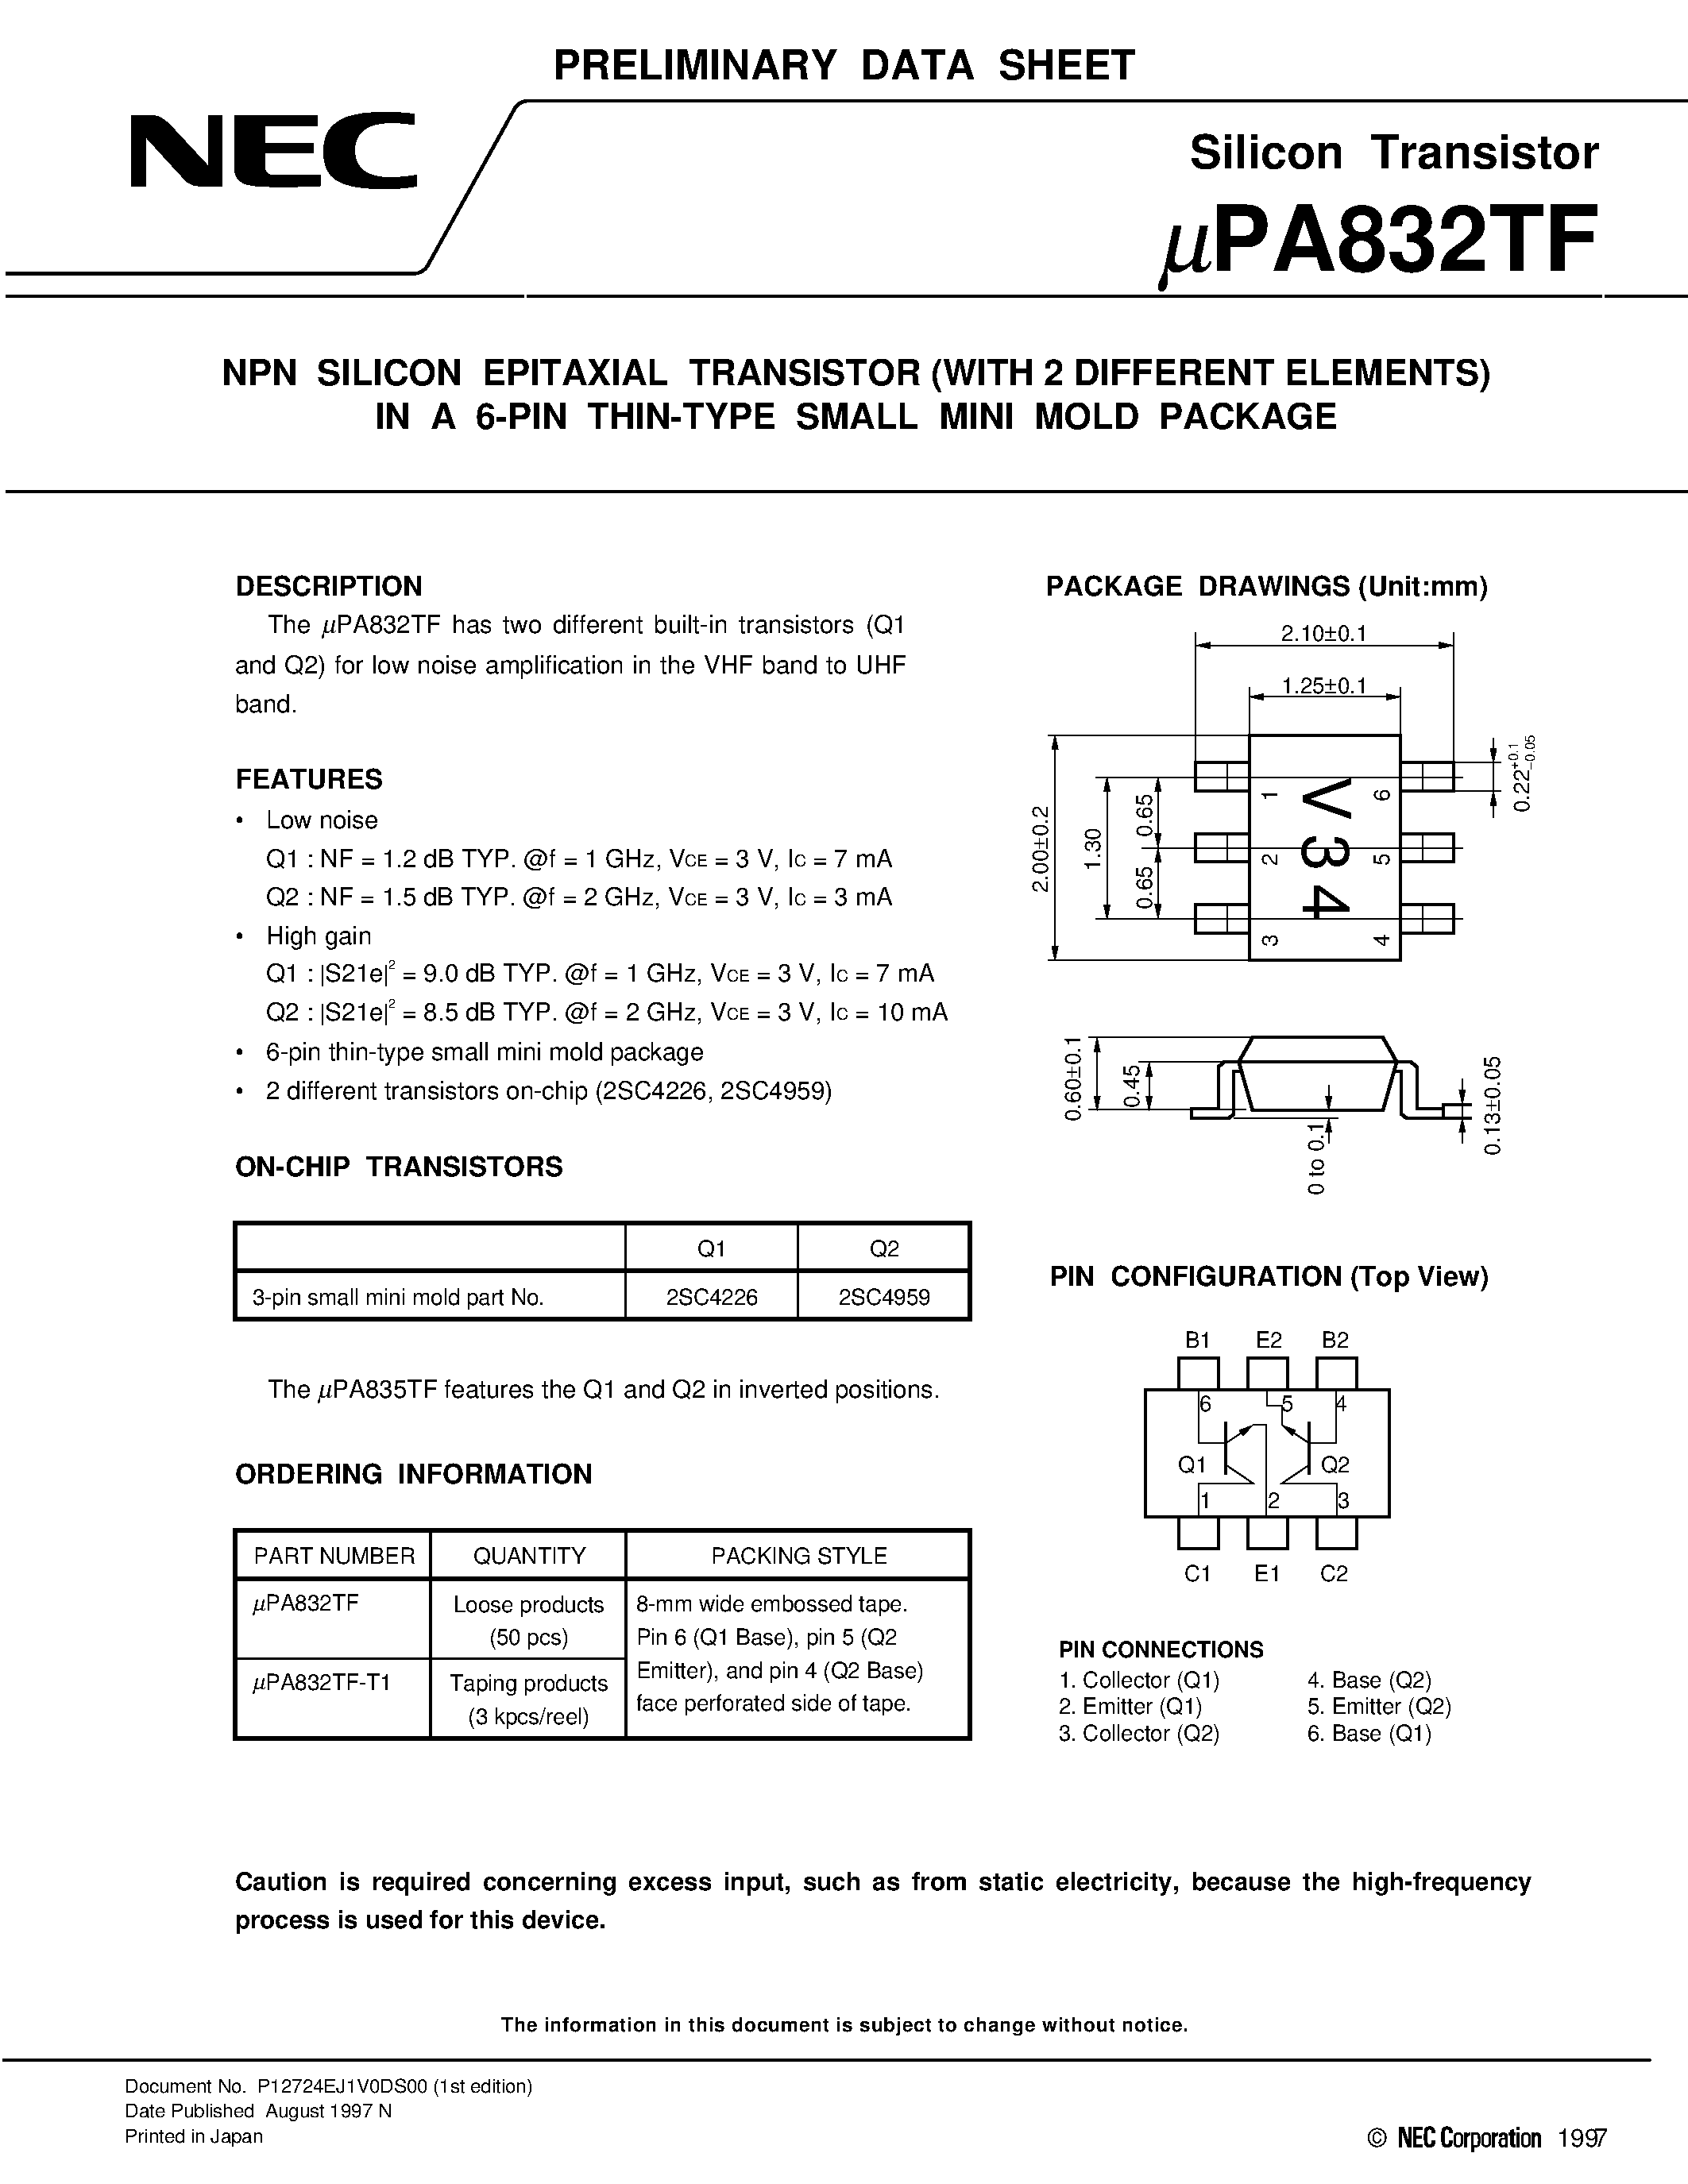 Datasheet UPA832TF - NPN SILICON EPITAXIAL TRANSISTOR WITH 2 DIFFERENT ELEMENTS IN A 6-PIN THIN-TYPE SMALL MINI MOLD PACKAGE page 1